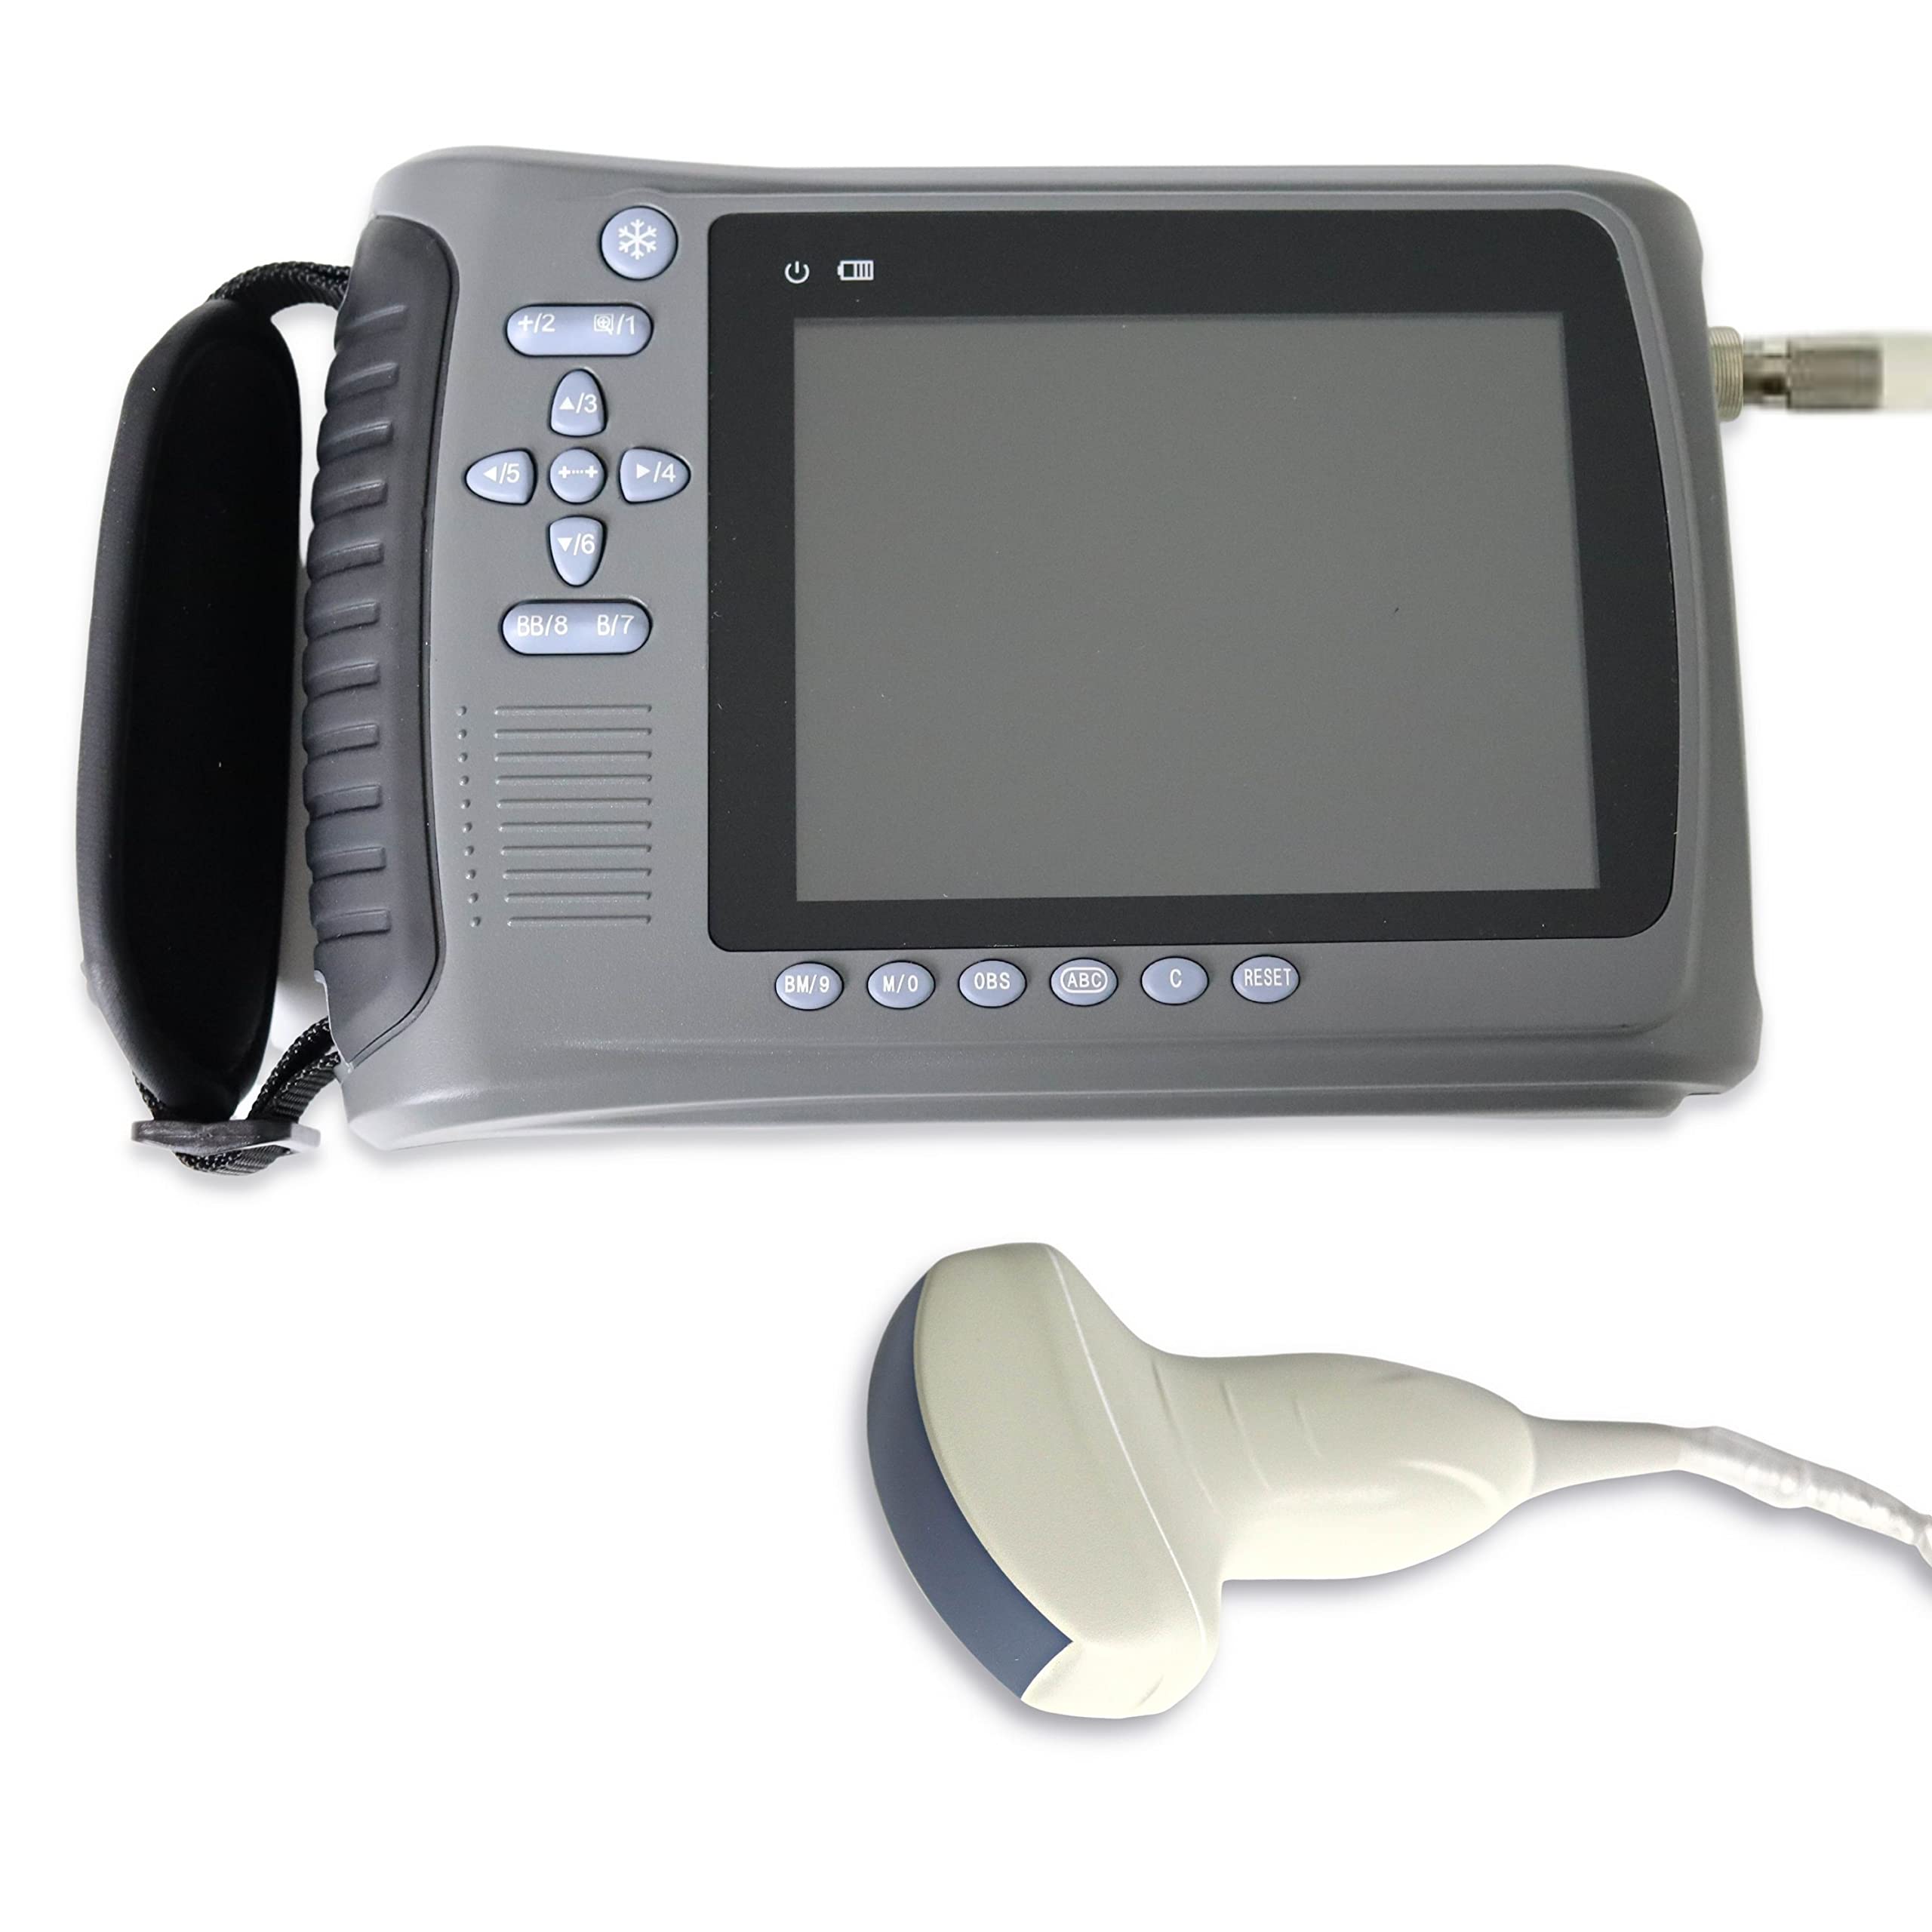 Portable Ultrasound machine E20 with three probes ; linear,convex and Tvs